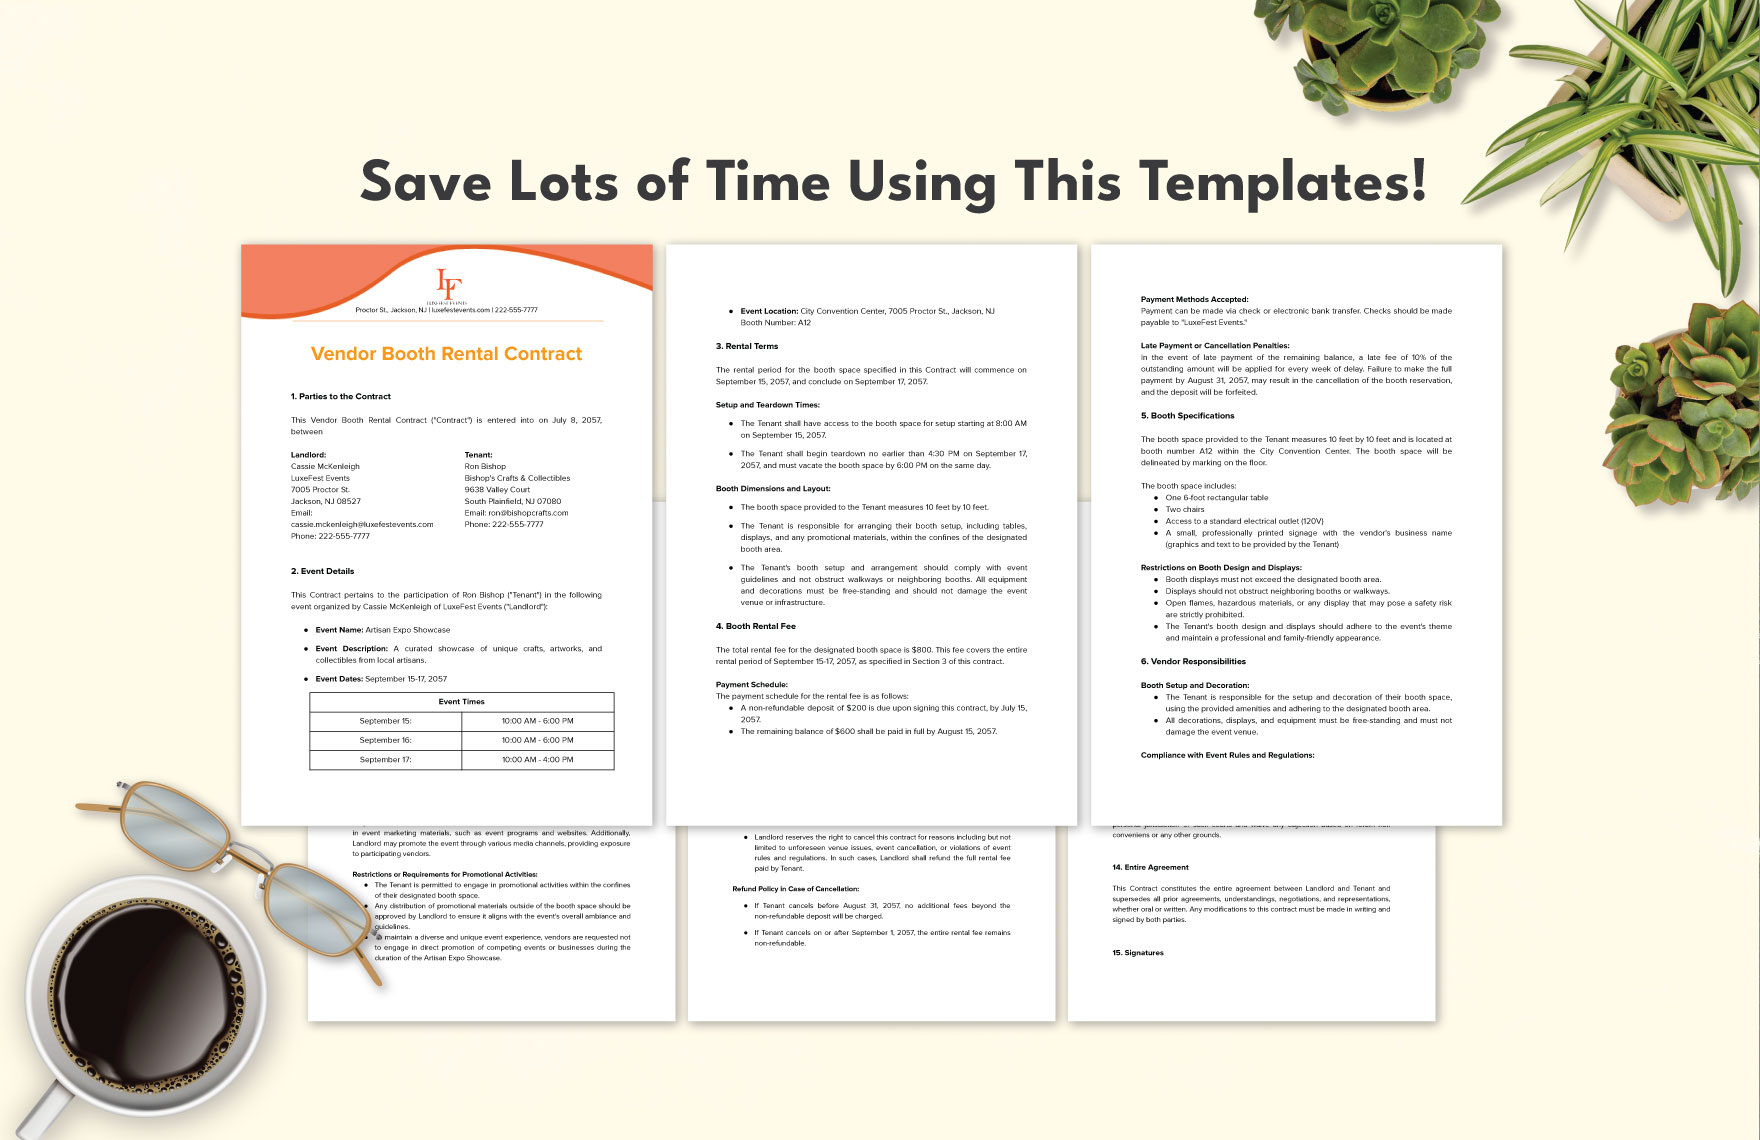 Vendor Booth Rental Contract Template in Word PDF Google Docs